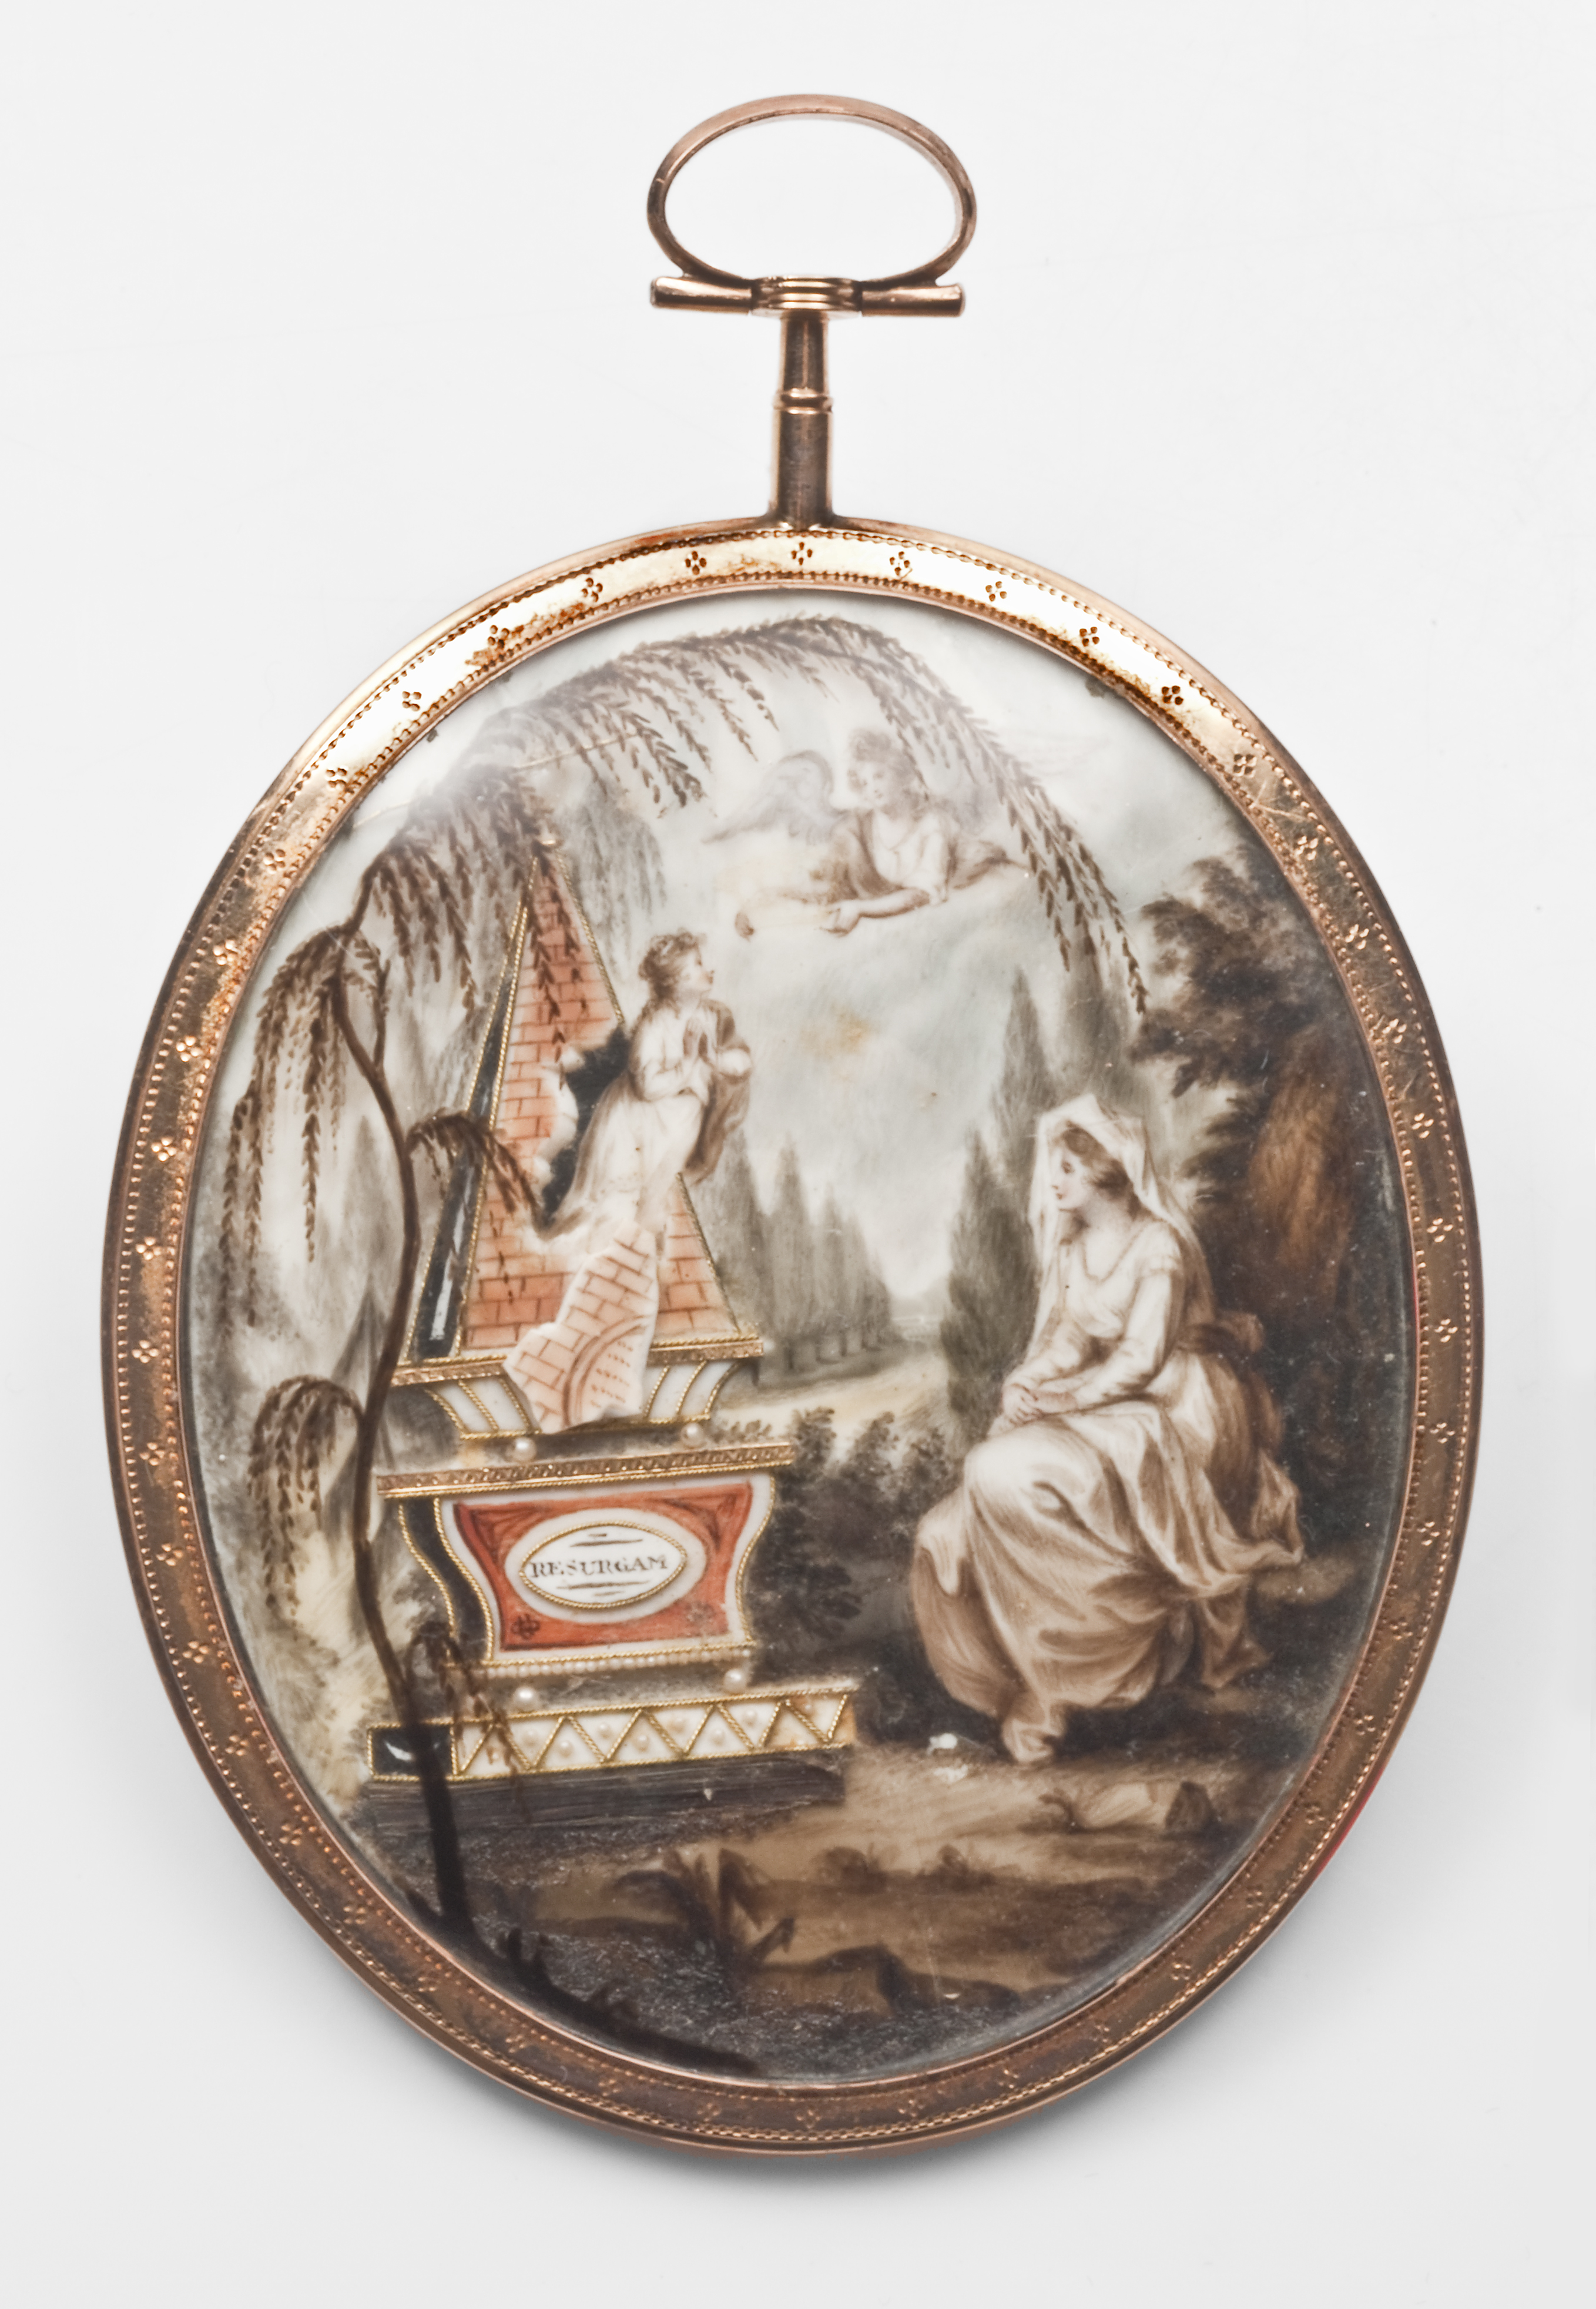 "RESURGAM" (resurrection) mourning miniature painted on ivory. This features the mourning classical female, the soul of the child, angels, a tomb, cypress and willow.